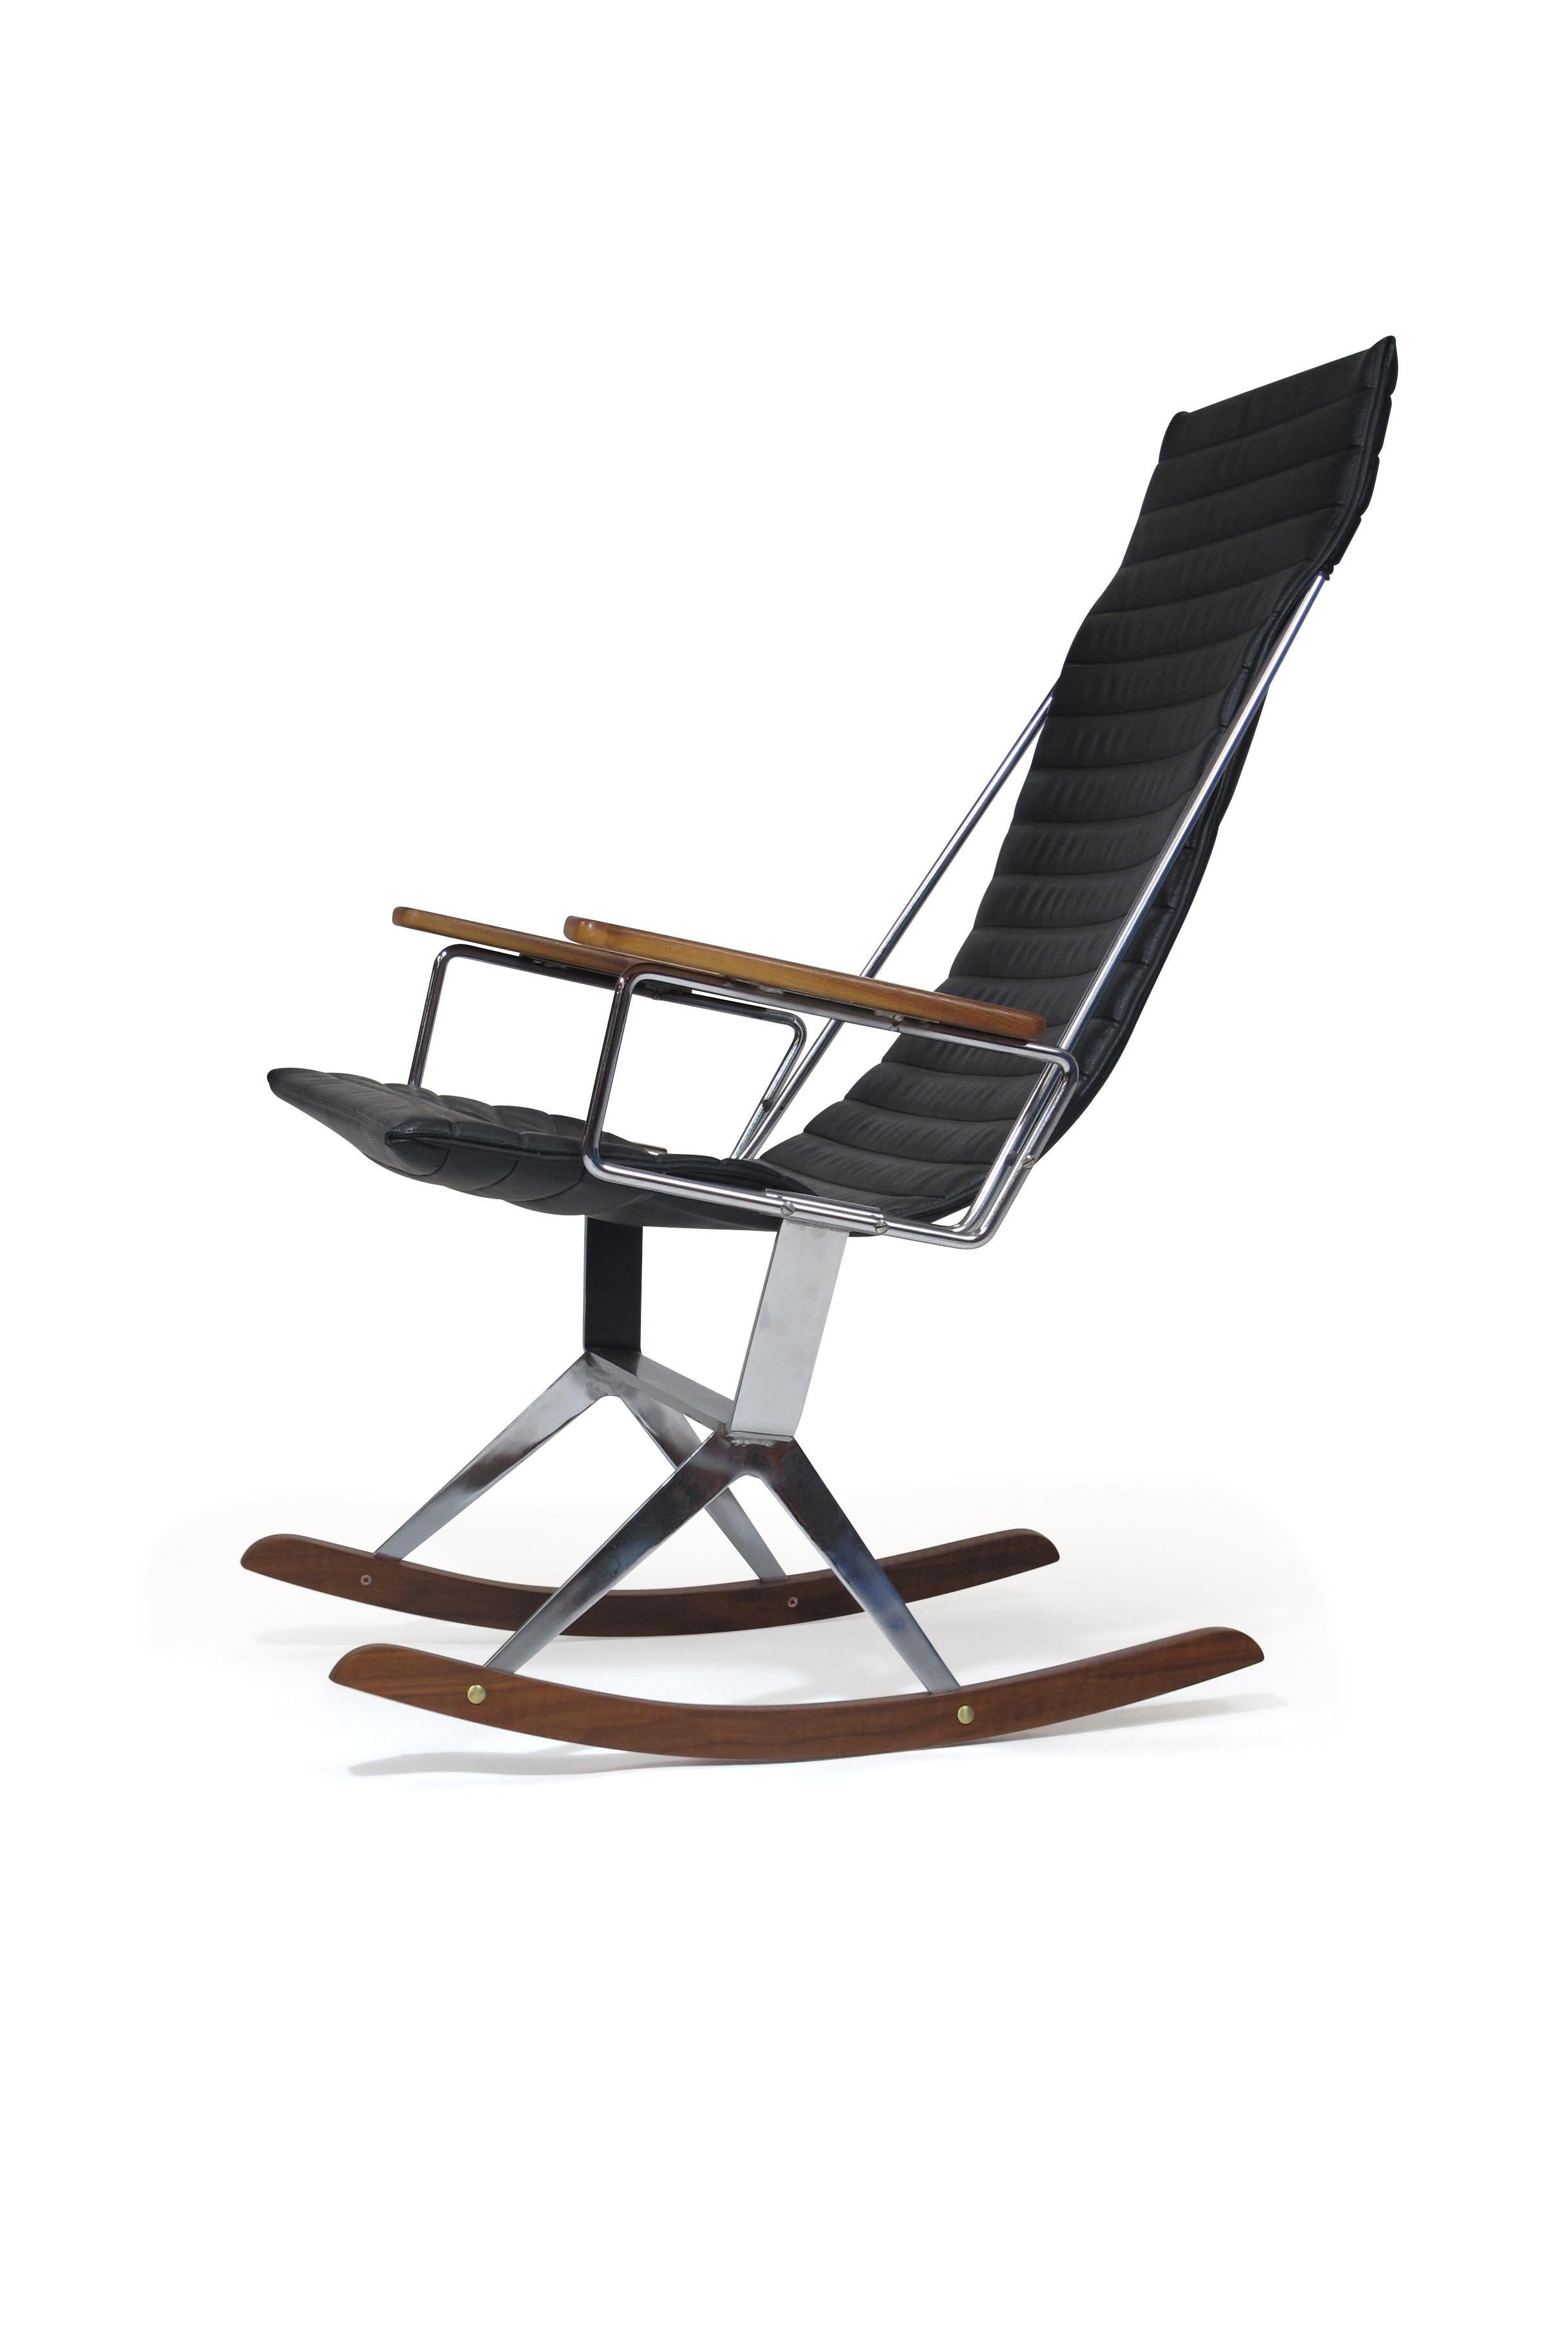 Rocking chair designed by California designer Gerald McCabe for Brown Saltman, circa 1960. The sling seat is upholstered in the original channel backed black vinyl, which slips onto a round bar steel frame with walnut arms. Flat-bar steel frame